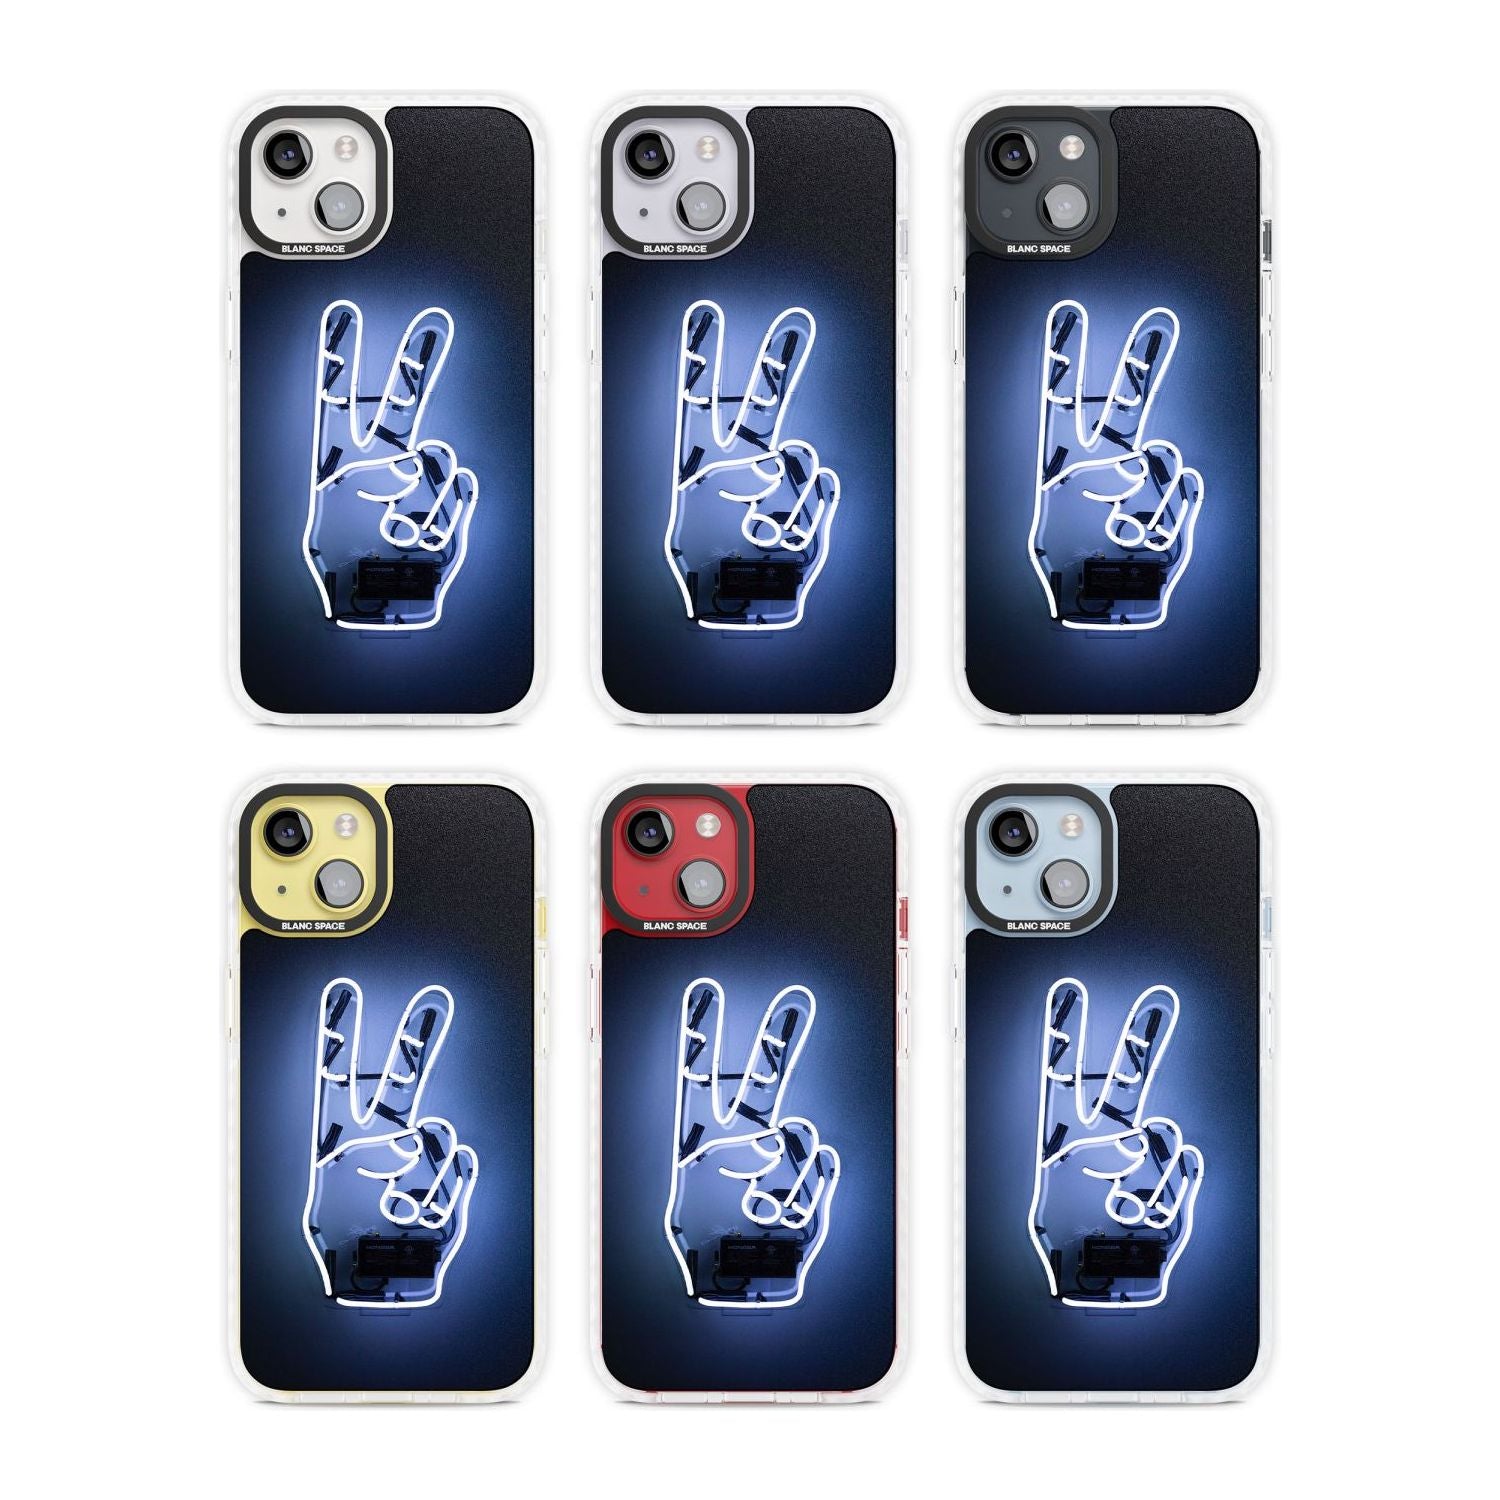 Peace Sign Hand Neon Sign Phone Case iPhone 15 Pro Max / Black Impact Case,iPhone 15 Plus / Black Impact Case,iPhone 15 Pro / Black Impact Case,iPhone 15 / Black Impact Case,iPhone 15 Pro Max / Impact Case,iPhone 15 Plus / Impact Case,iPhone 15 Pro / Impact Case,iPhone 15 / Impact Case,iPhone 15 Pro Max / Magsafe Black Impact Case,iPhone 15 Plus / Magsafe Black Impact Case,iPhone 15 Pro / Magsafe Black Impact Case,iPhone 15 / Magsafe Black Impact Case,iPhone 14 Pro Max / Black Impact Case,iPhone 14 Plus / B